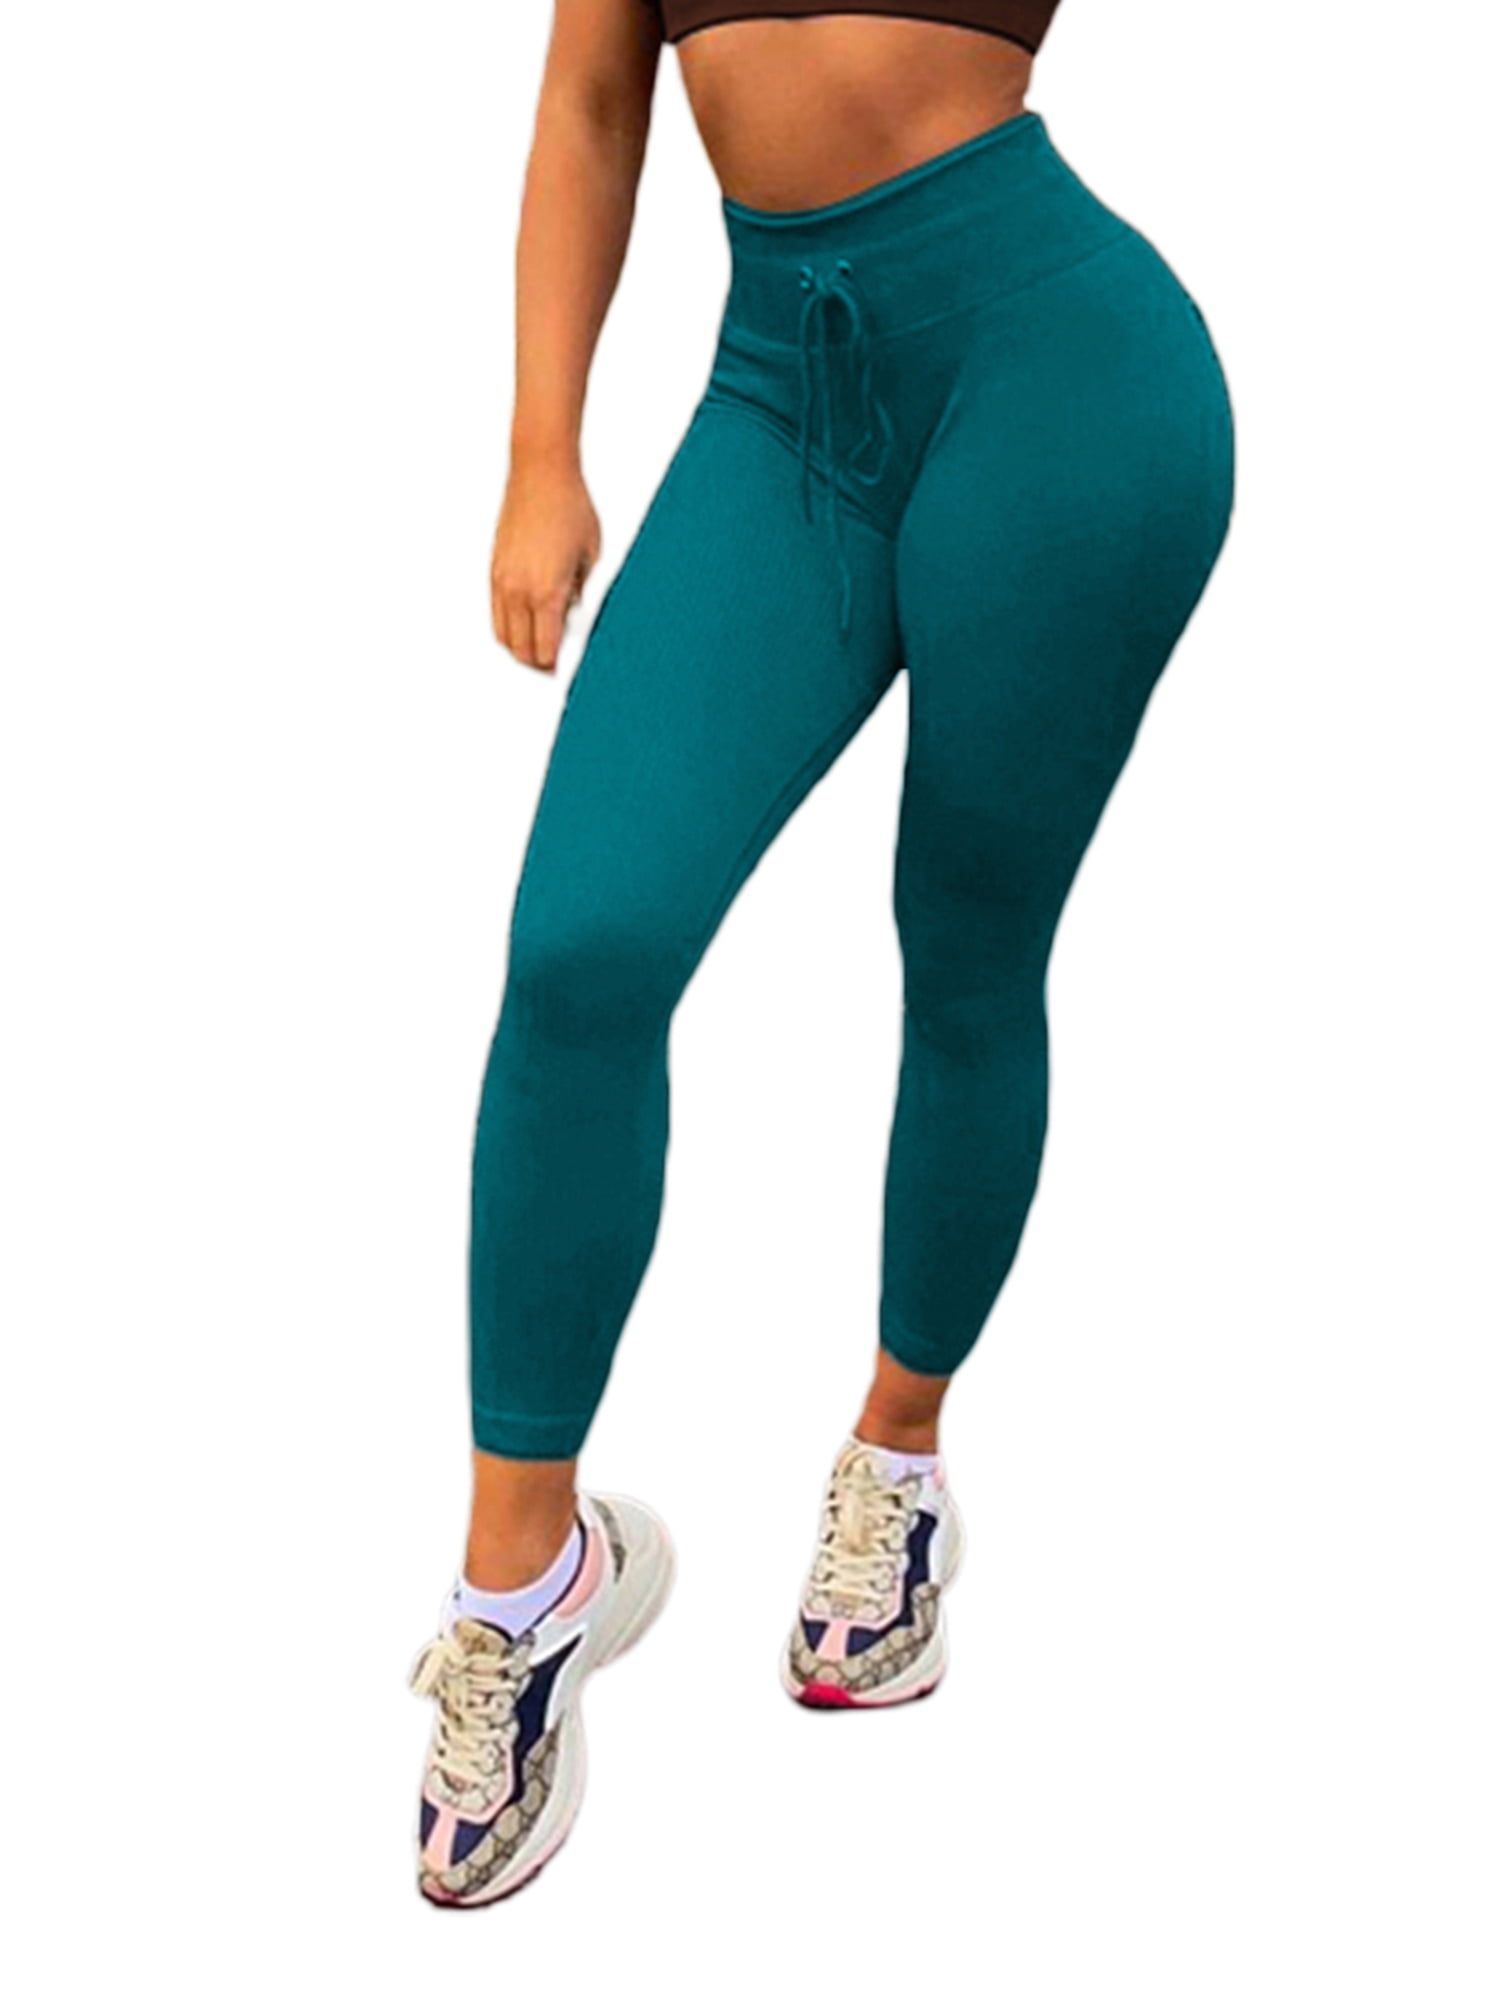 Women Anti-Cellulite High Waisted Yoga Pants Gym Leggings Sport Stretch Trousers 